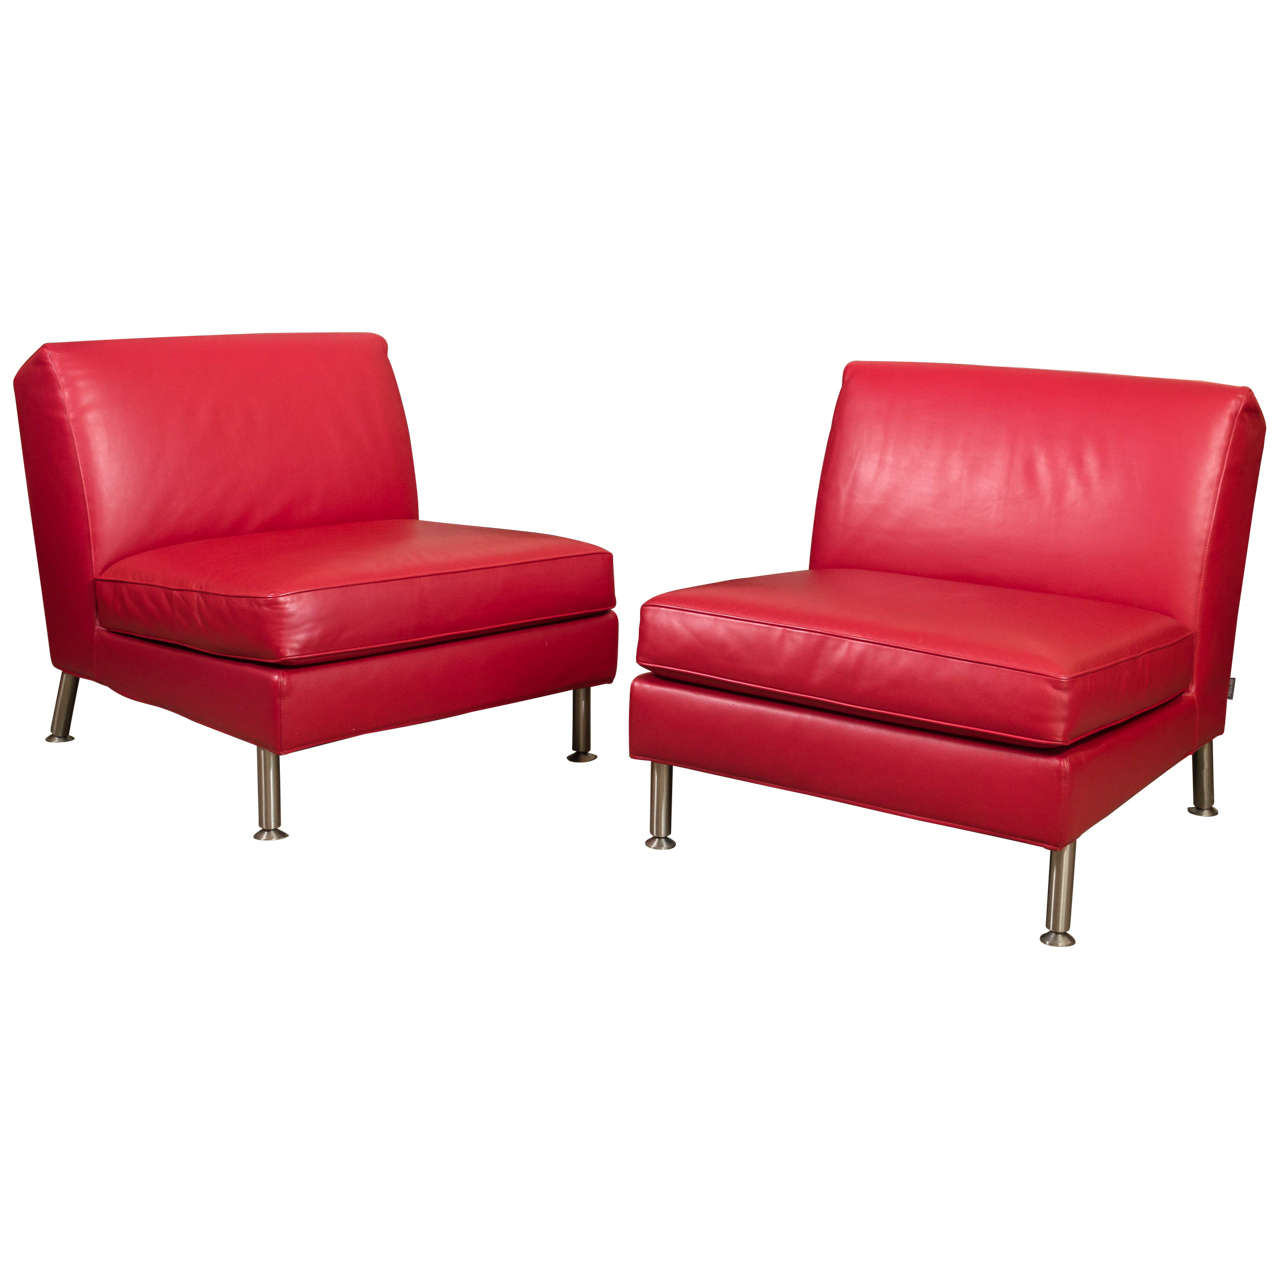 Pair of Italian Red Leather Lounge Chairs by Minotti